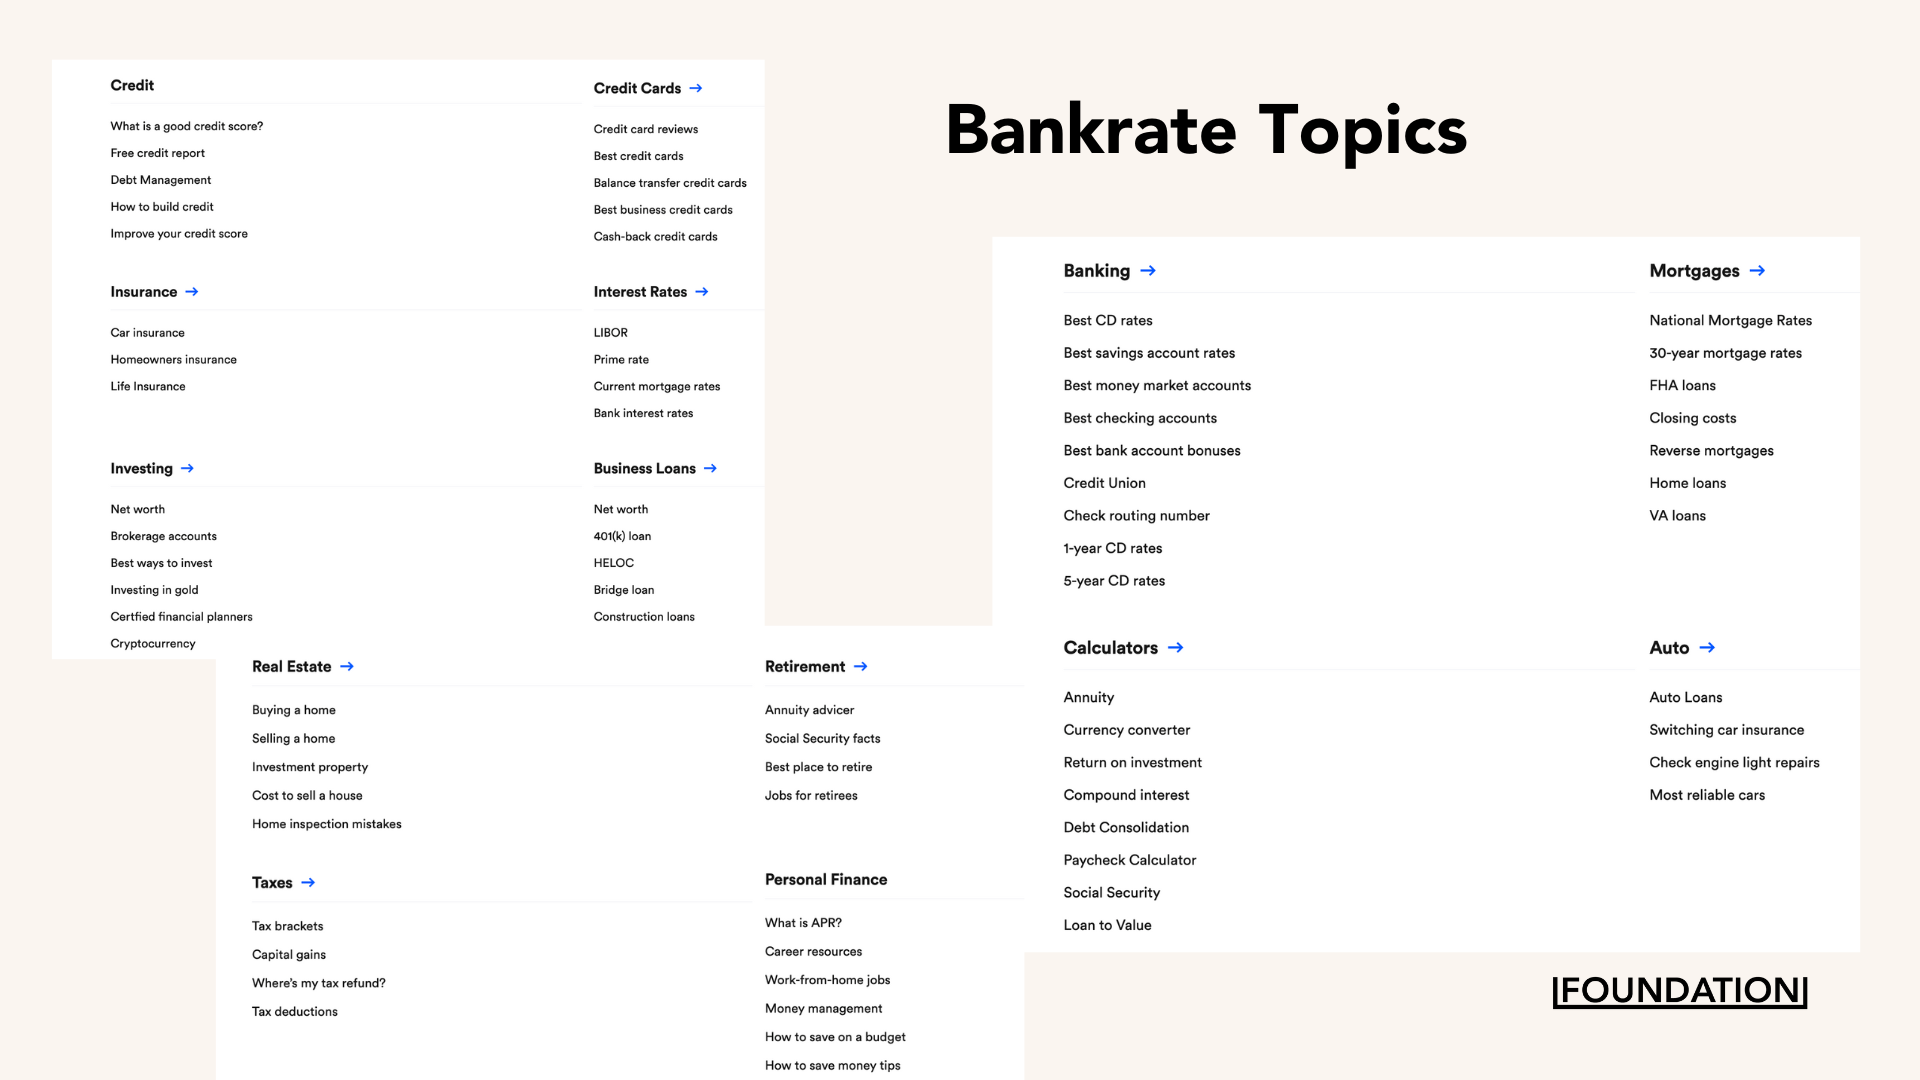 Finance topics Bankrate covers